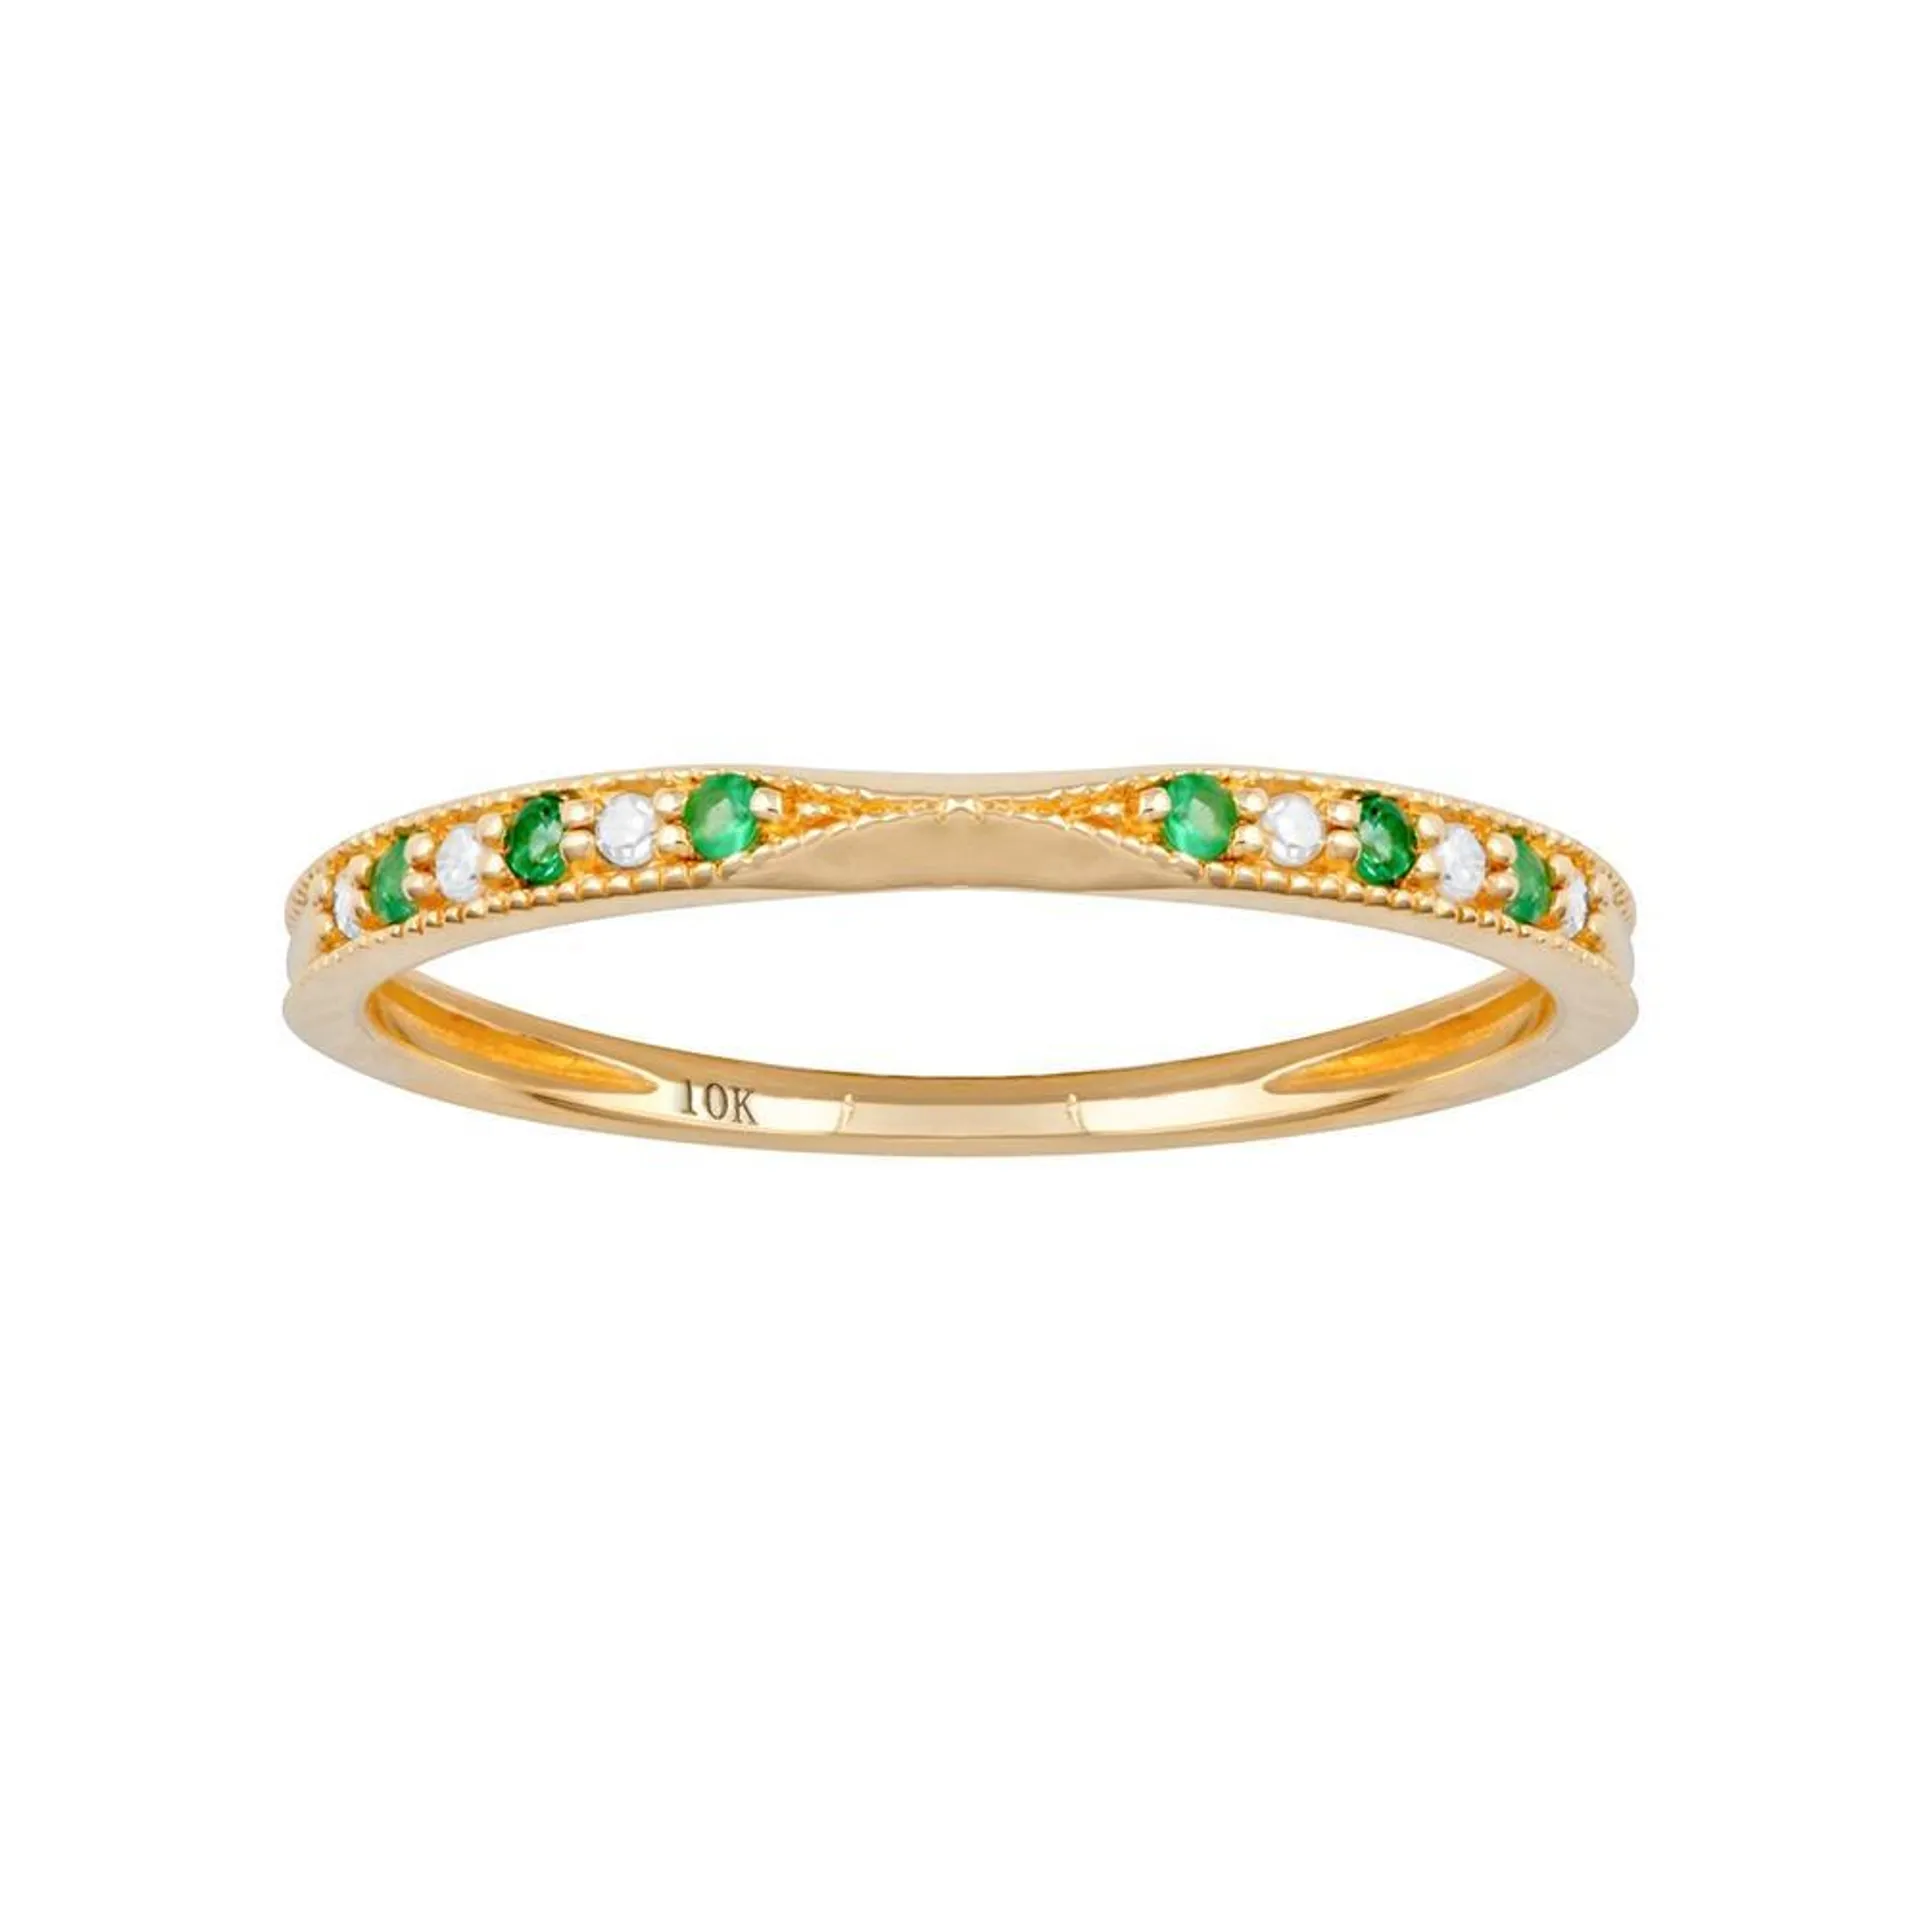 Viducci 10k Yellow Gold Vintage Style Emerald and Diamond Stackable Band